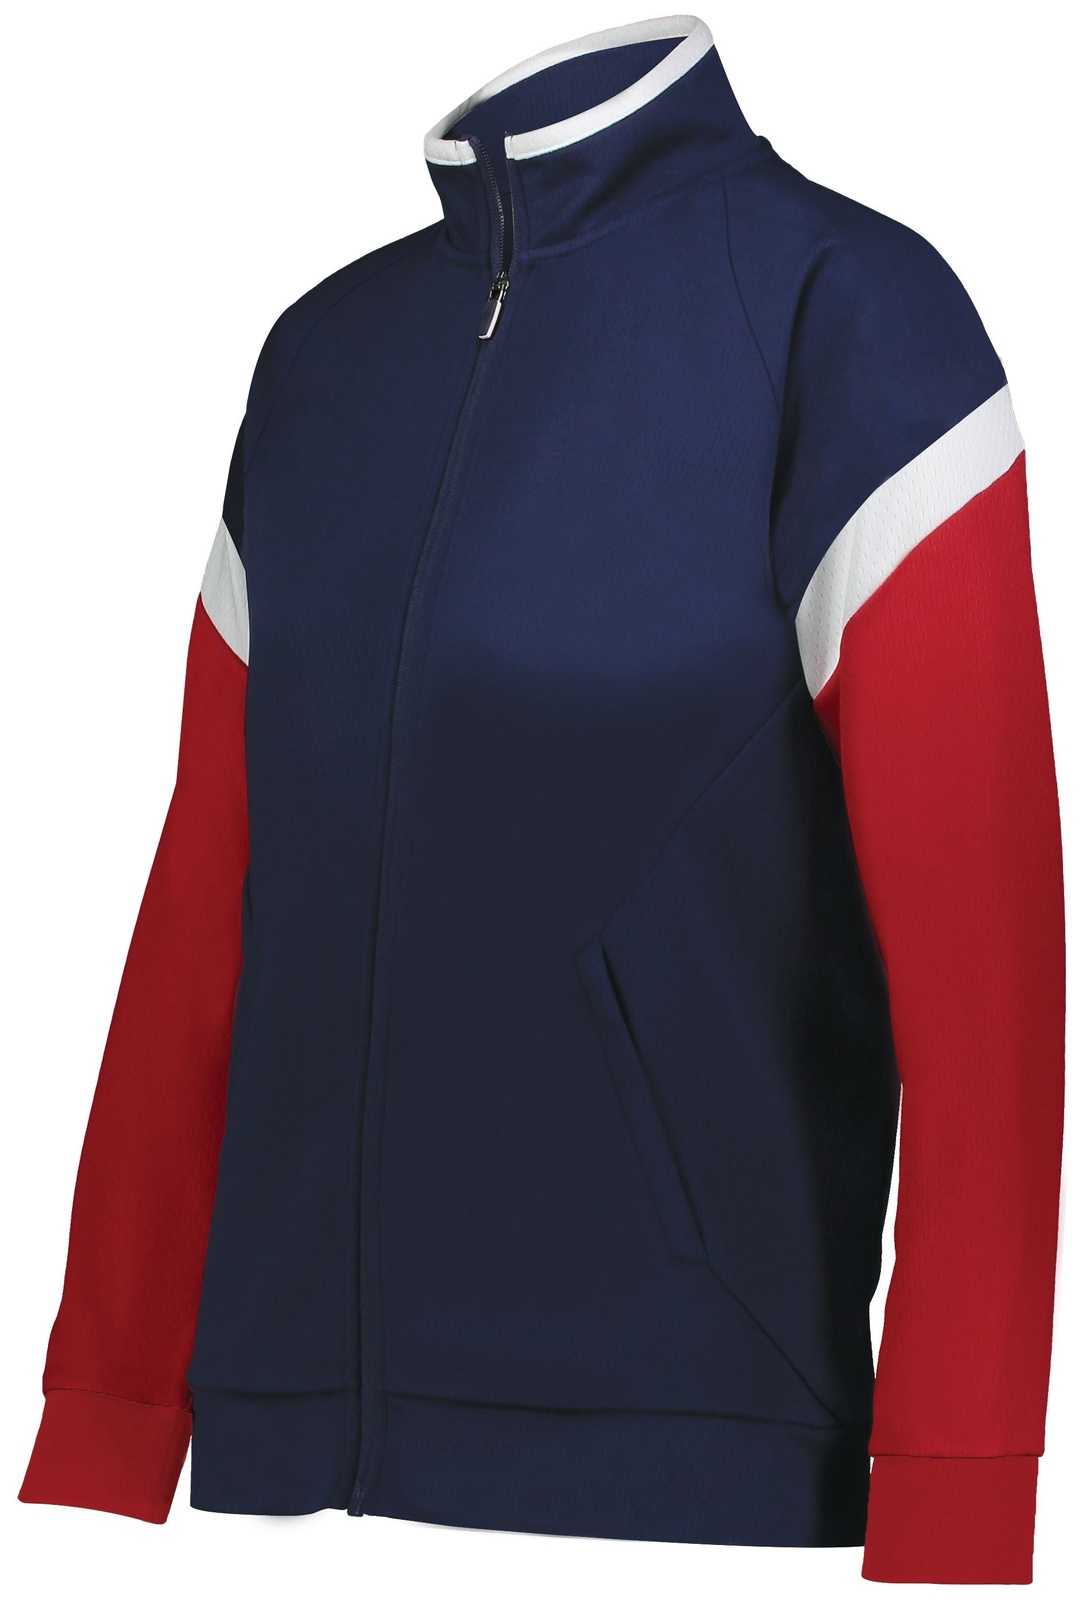 Holloway 229779 Ladies Limitless Jacket - Navy White Scarlet - HIT a Double